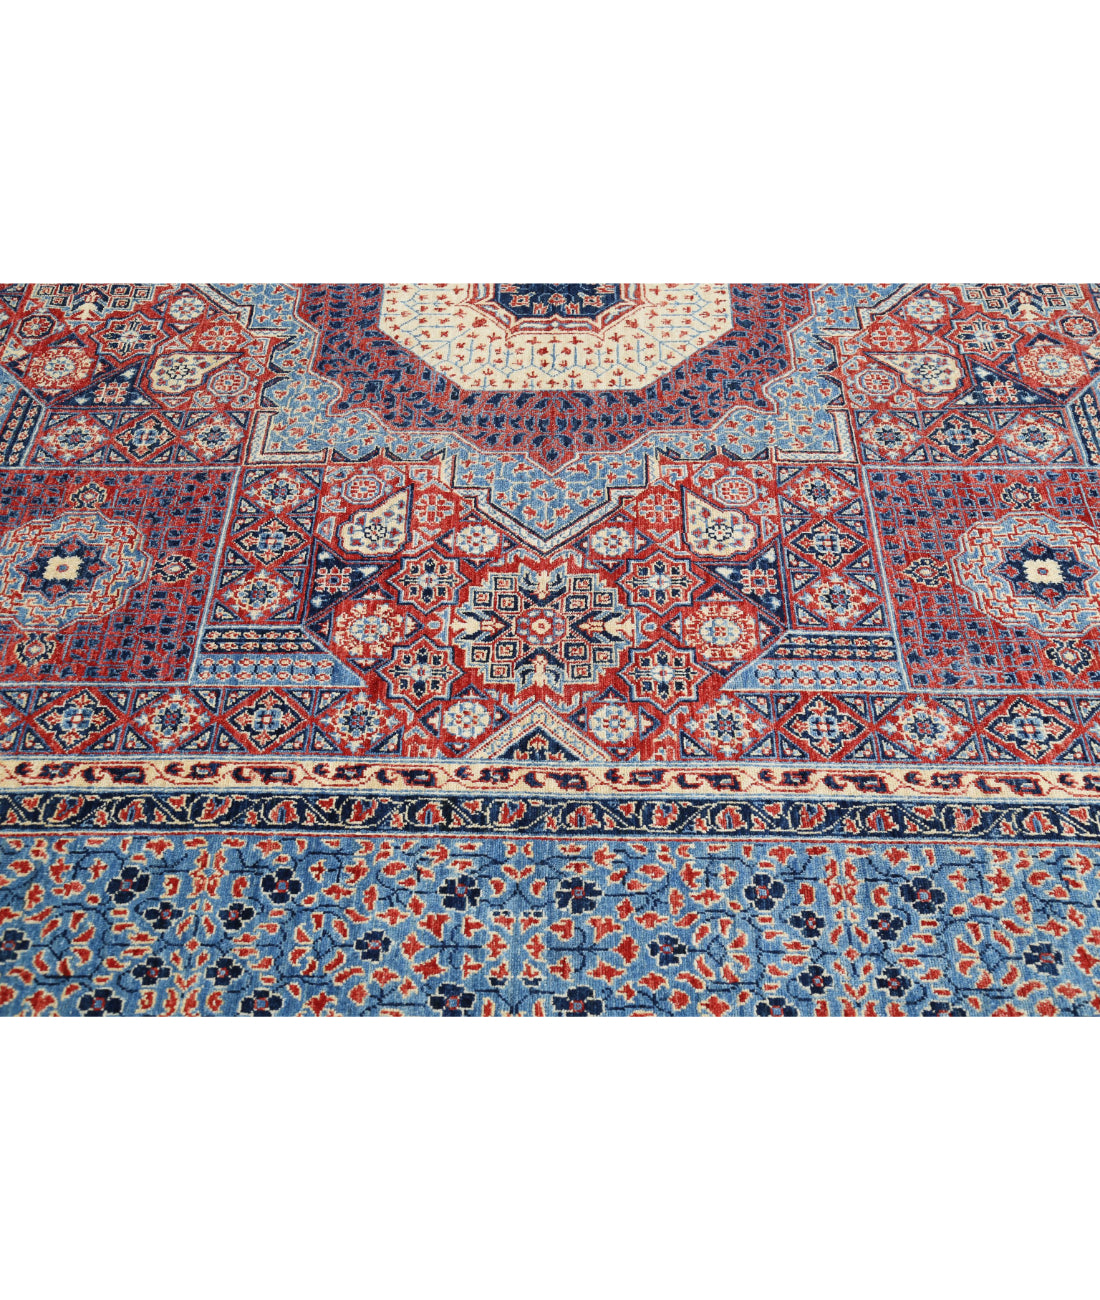 Hand Knotted Mamluk Wool Rug - 10'1'' x 13'8'' 10'1'' x 13'8'' (303 X 410) / Red / Blue